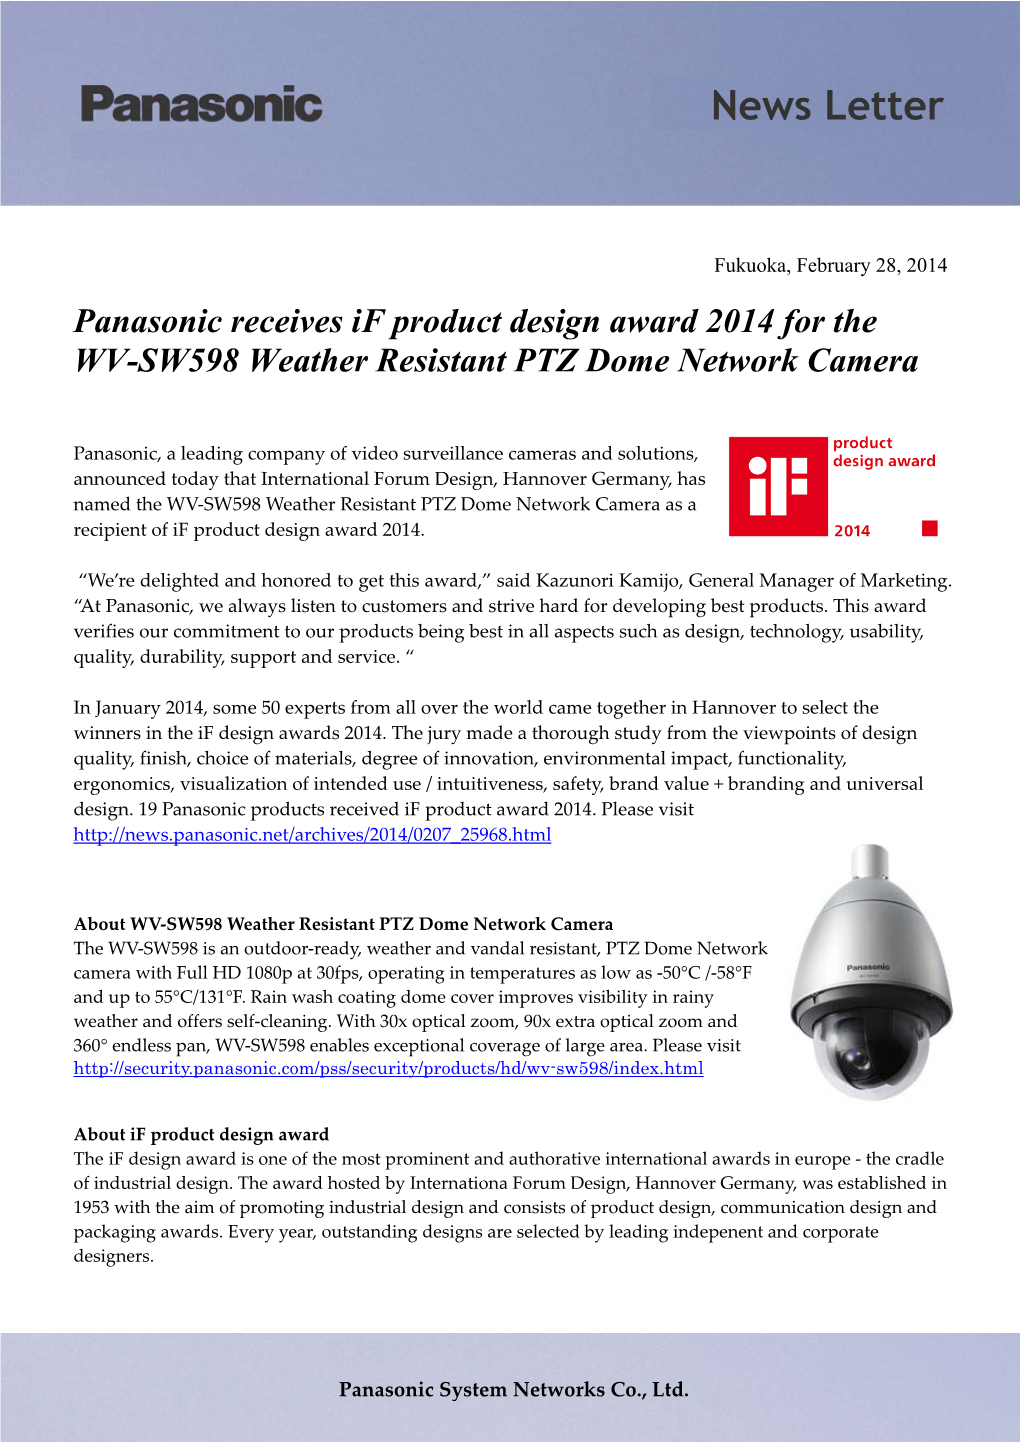 Panasonic Receives If Product Design Award 2014 for the WV-SW598 Weather Resistant PTZ Dome Network Camera